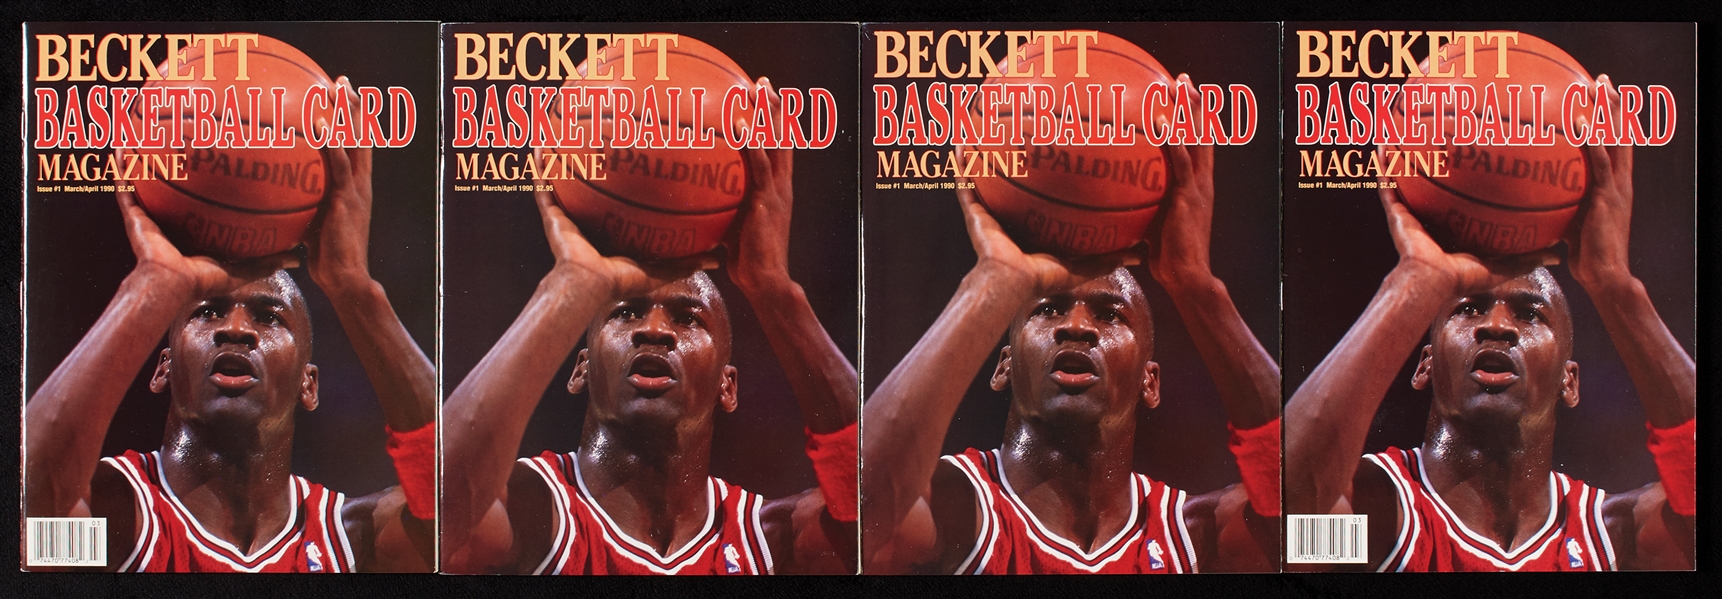 Beckett Basketball No. 1 Issue Group with Michael Jordan Cover (3)